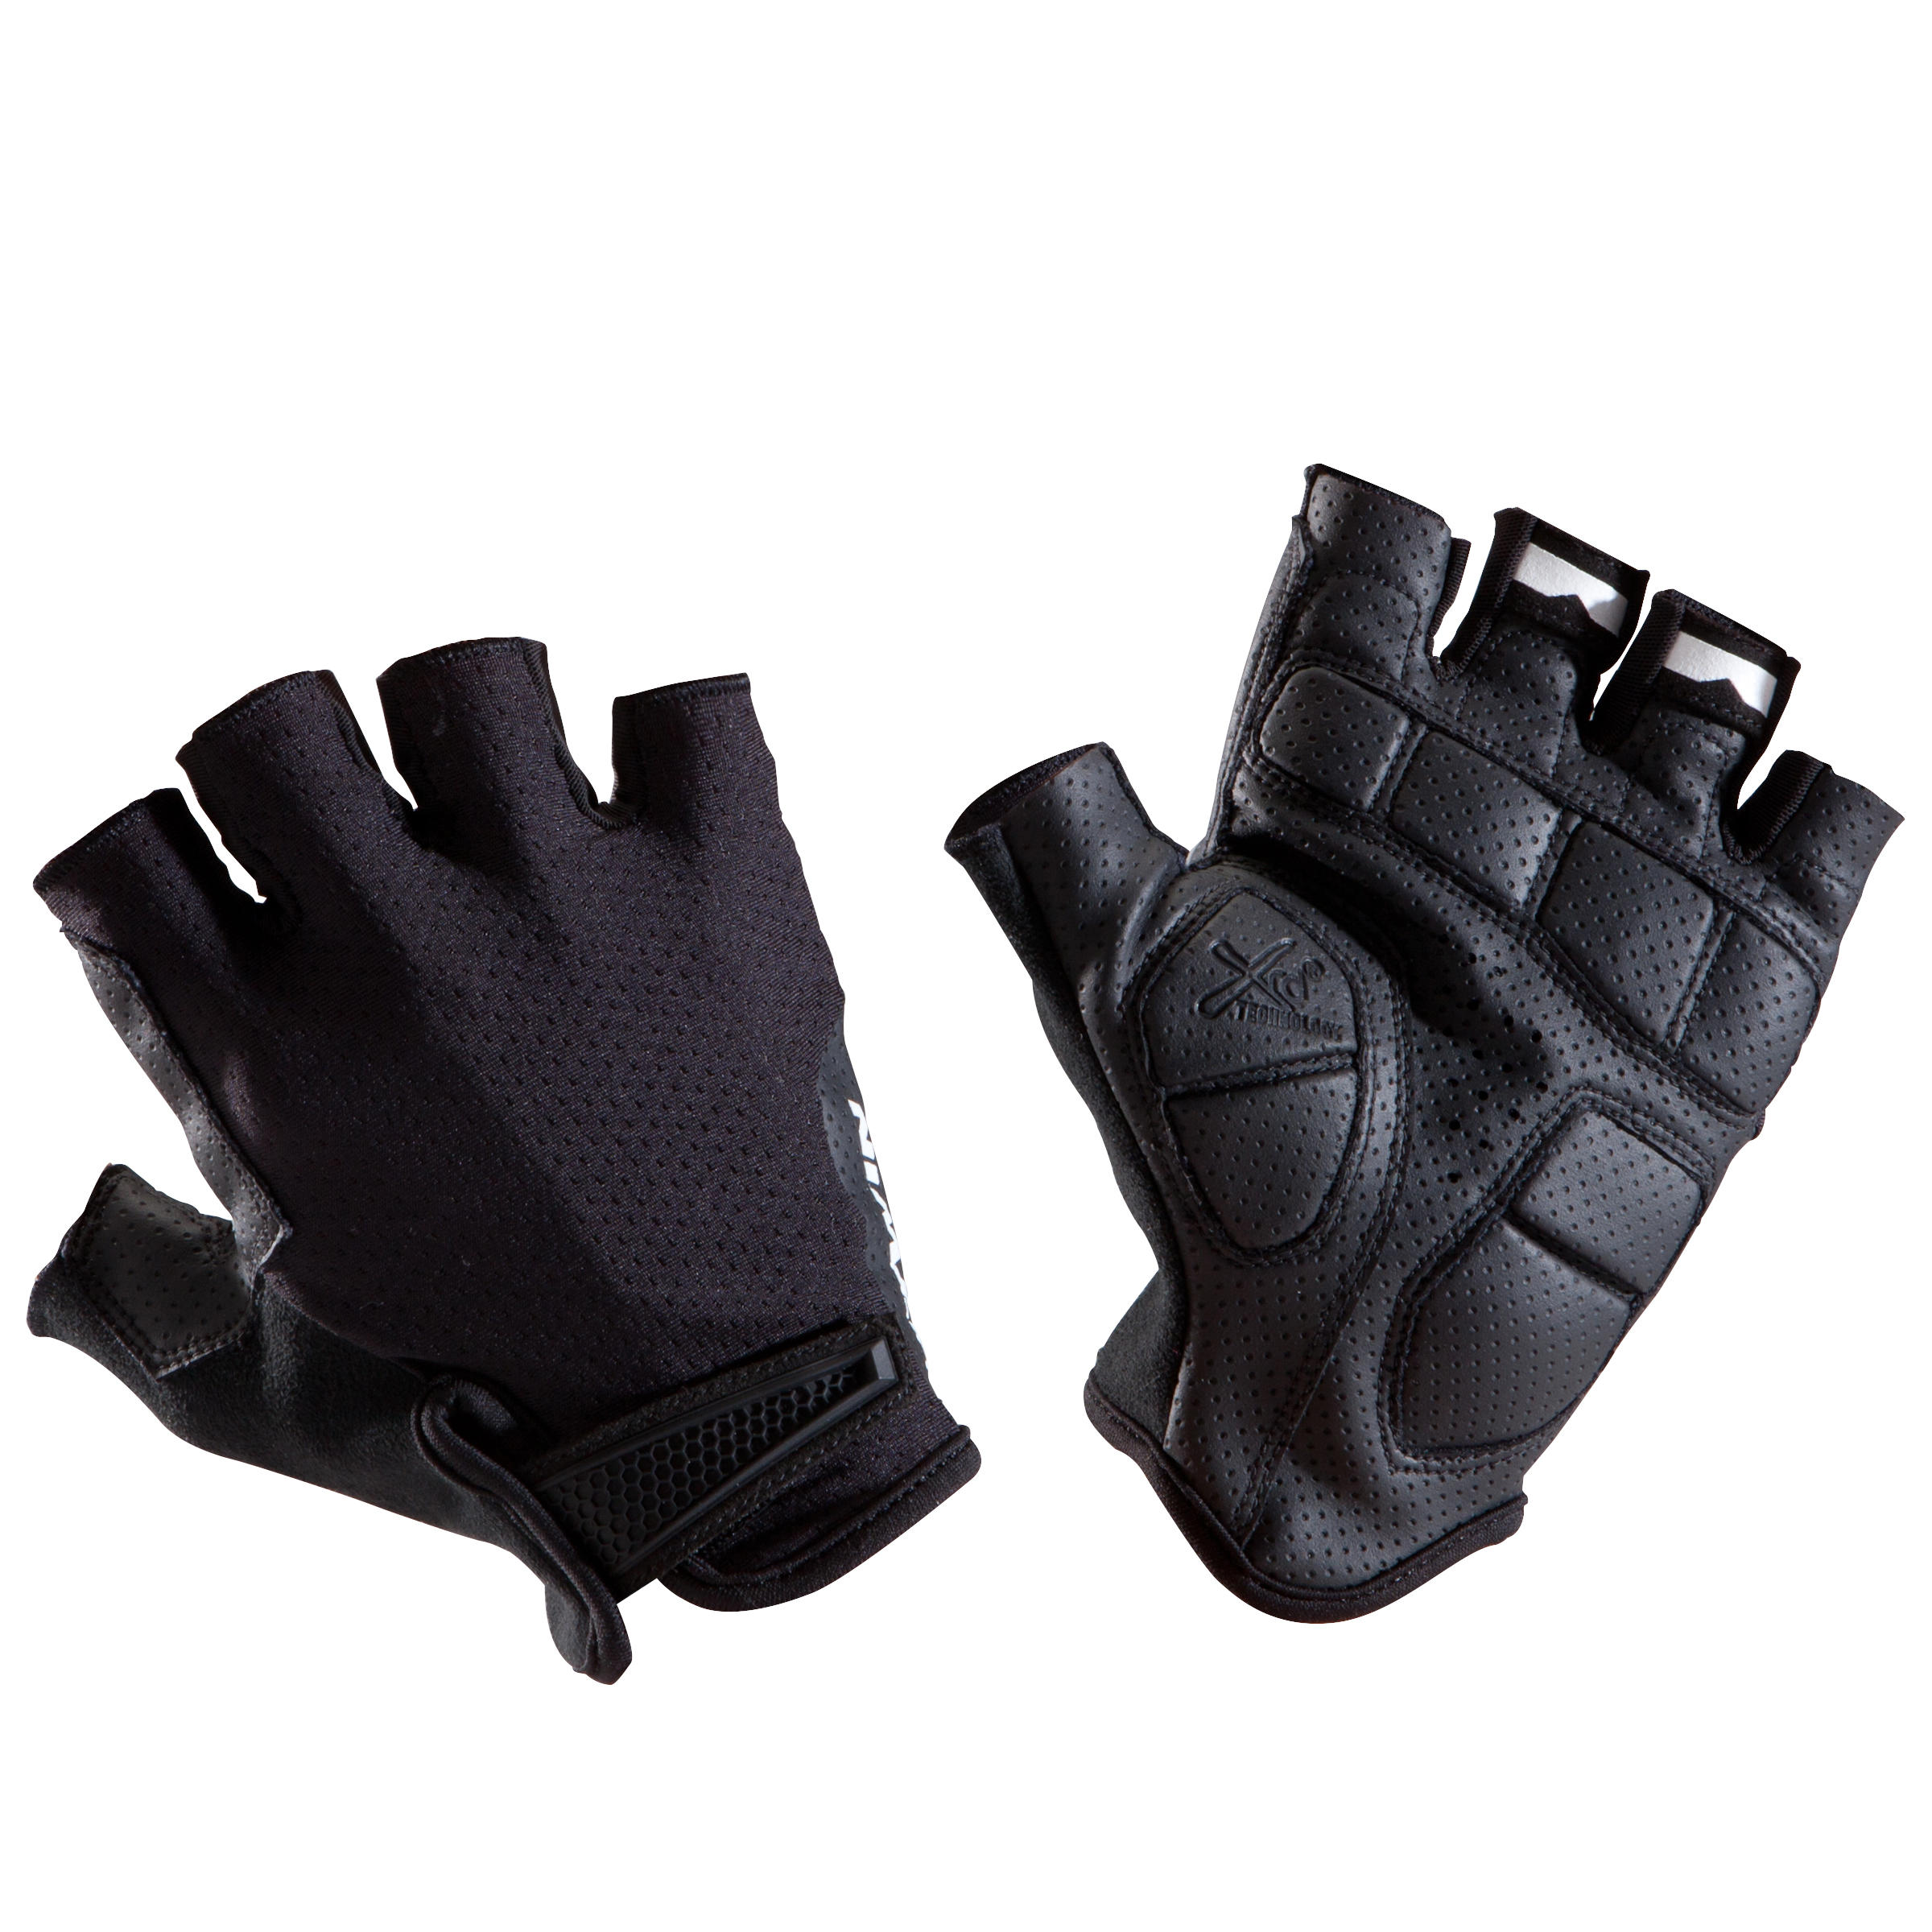 RoadC 900 Cycling Gloves - Black